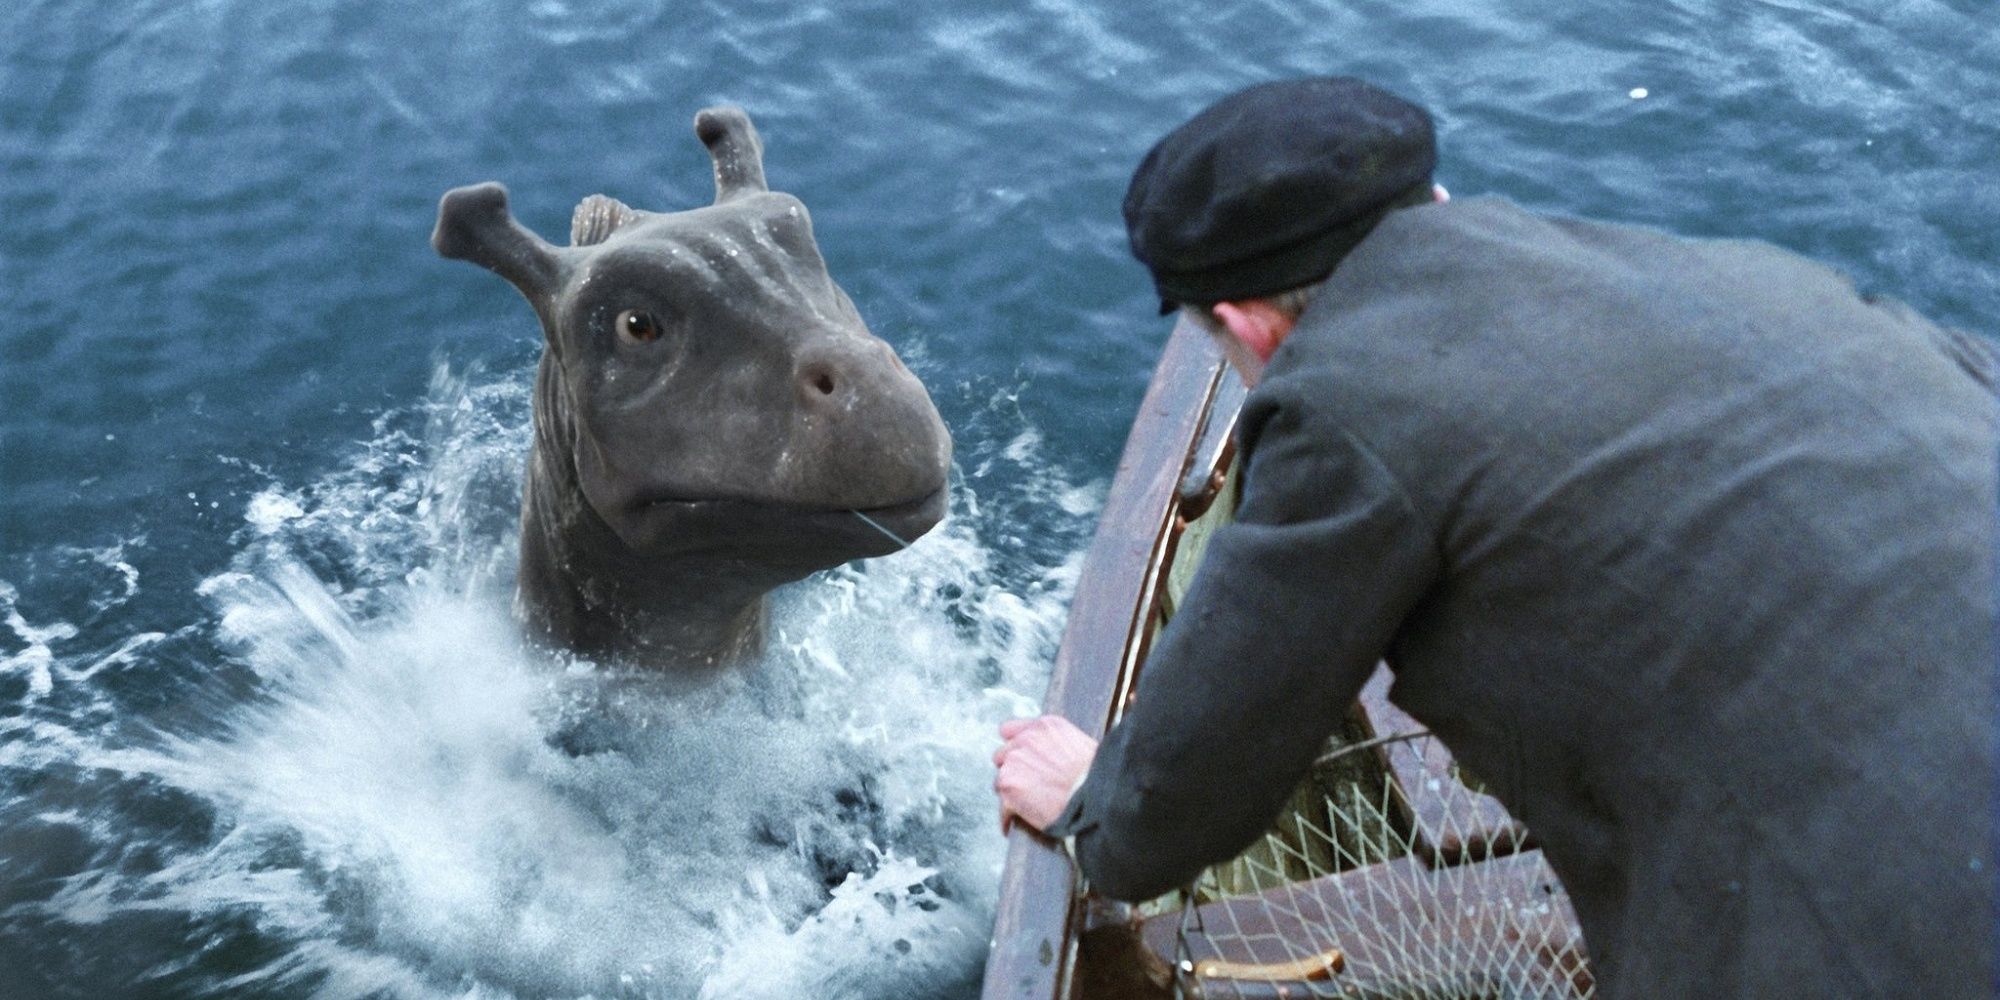 Crusoe and Angus in the water on a boat in The Water Horse.